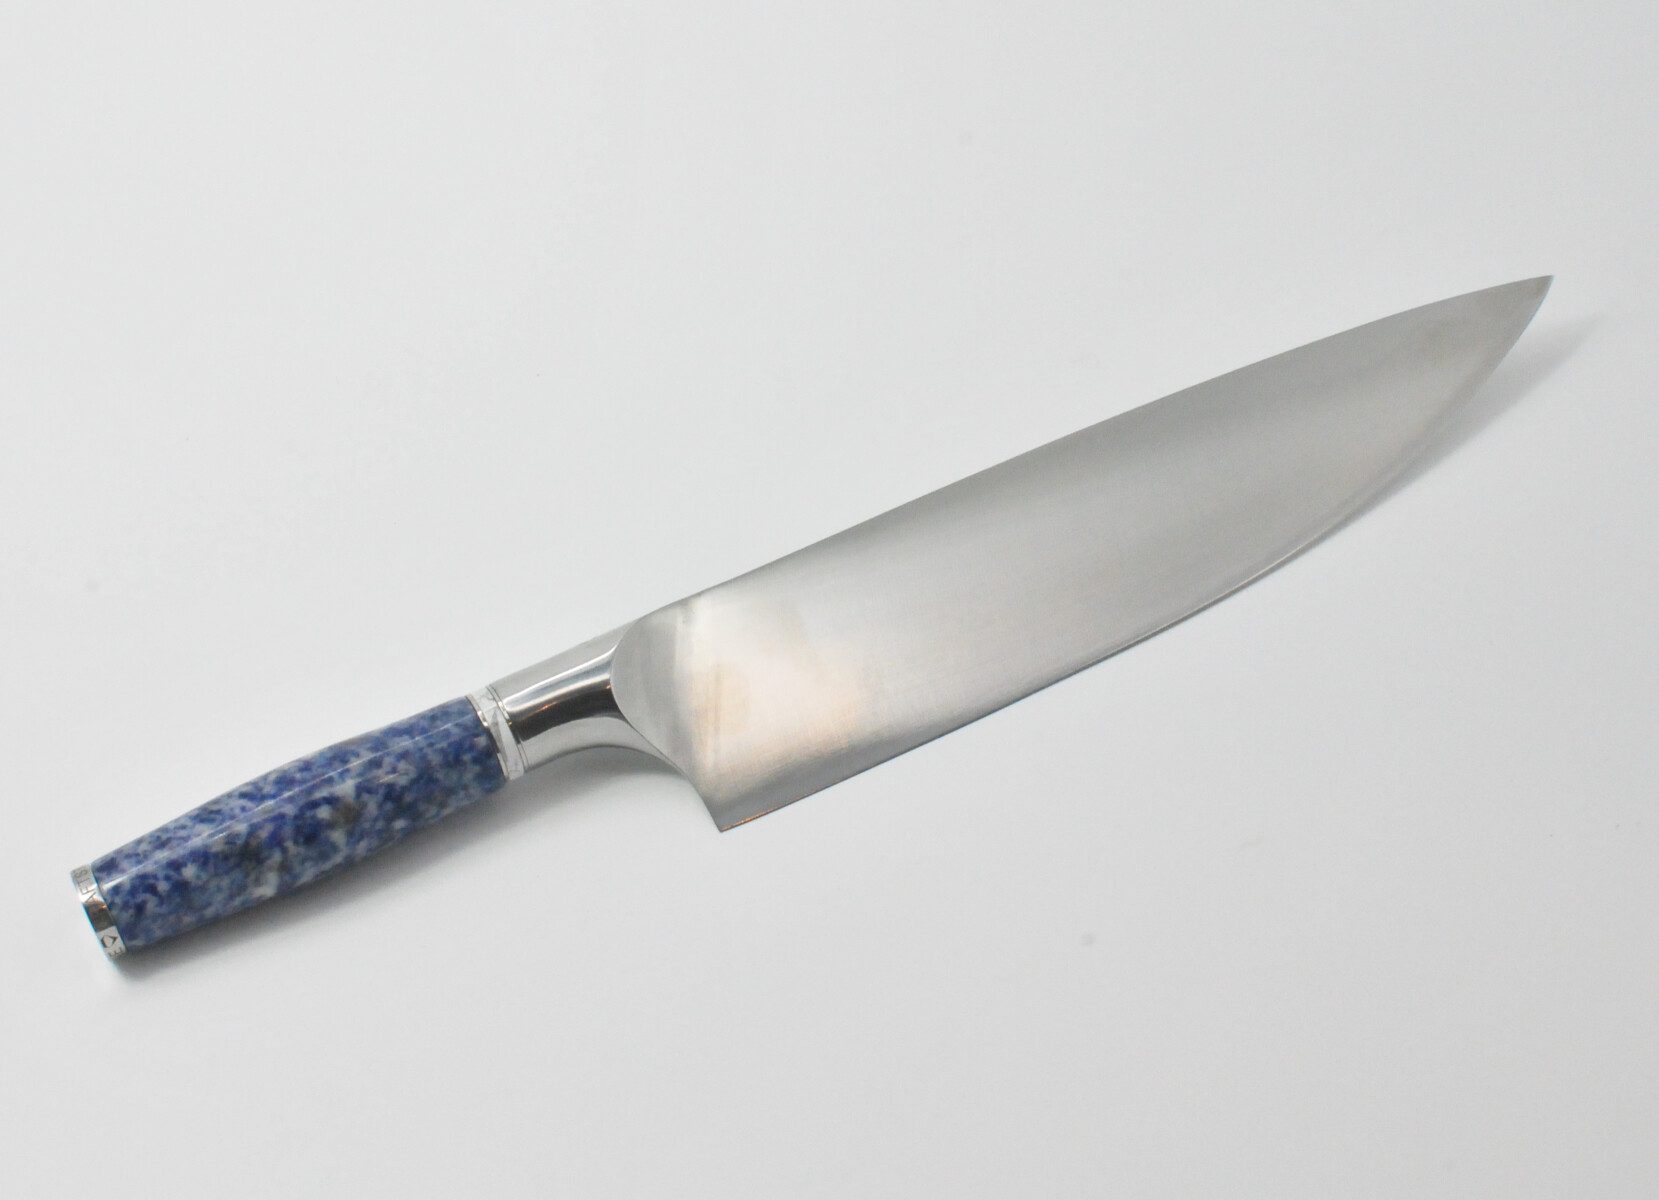 https://www.craftstoneknives.com/wp-content/uploads/bfi_thumb/10-Inch-Chef-Knife-with-a-Blue-Dot-Marble-Handle-White-Cubic-Zirconia-Stone-at-the-Back-of-the-Knife-and-White-Howlite-and-Stainless-Steel-Rings-3jbc6wbba7tmy9wemwbzey.jpg